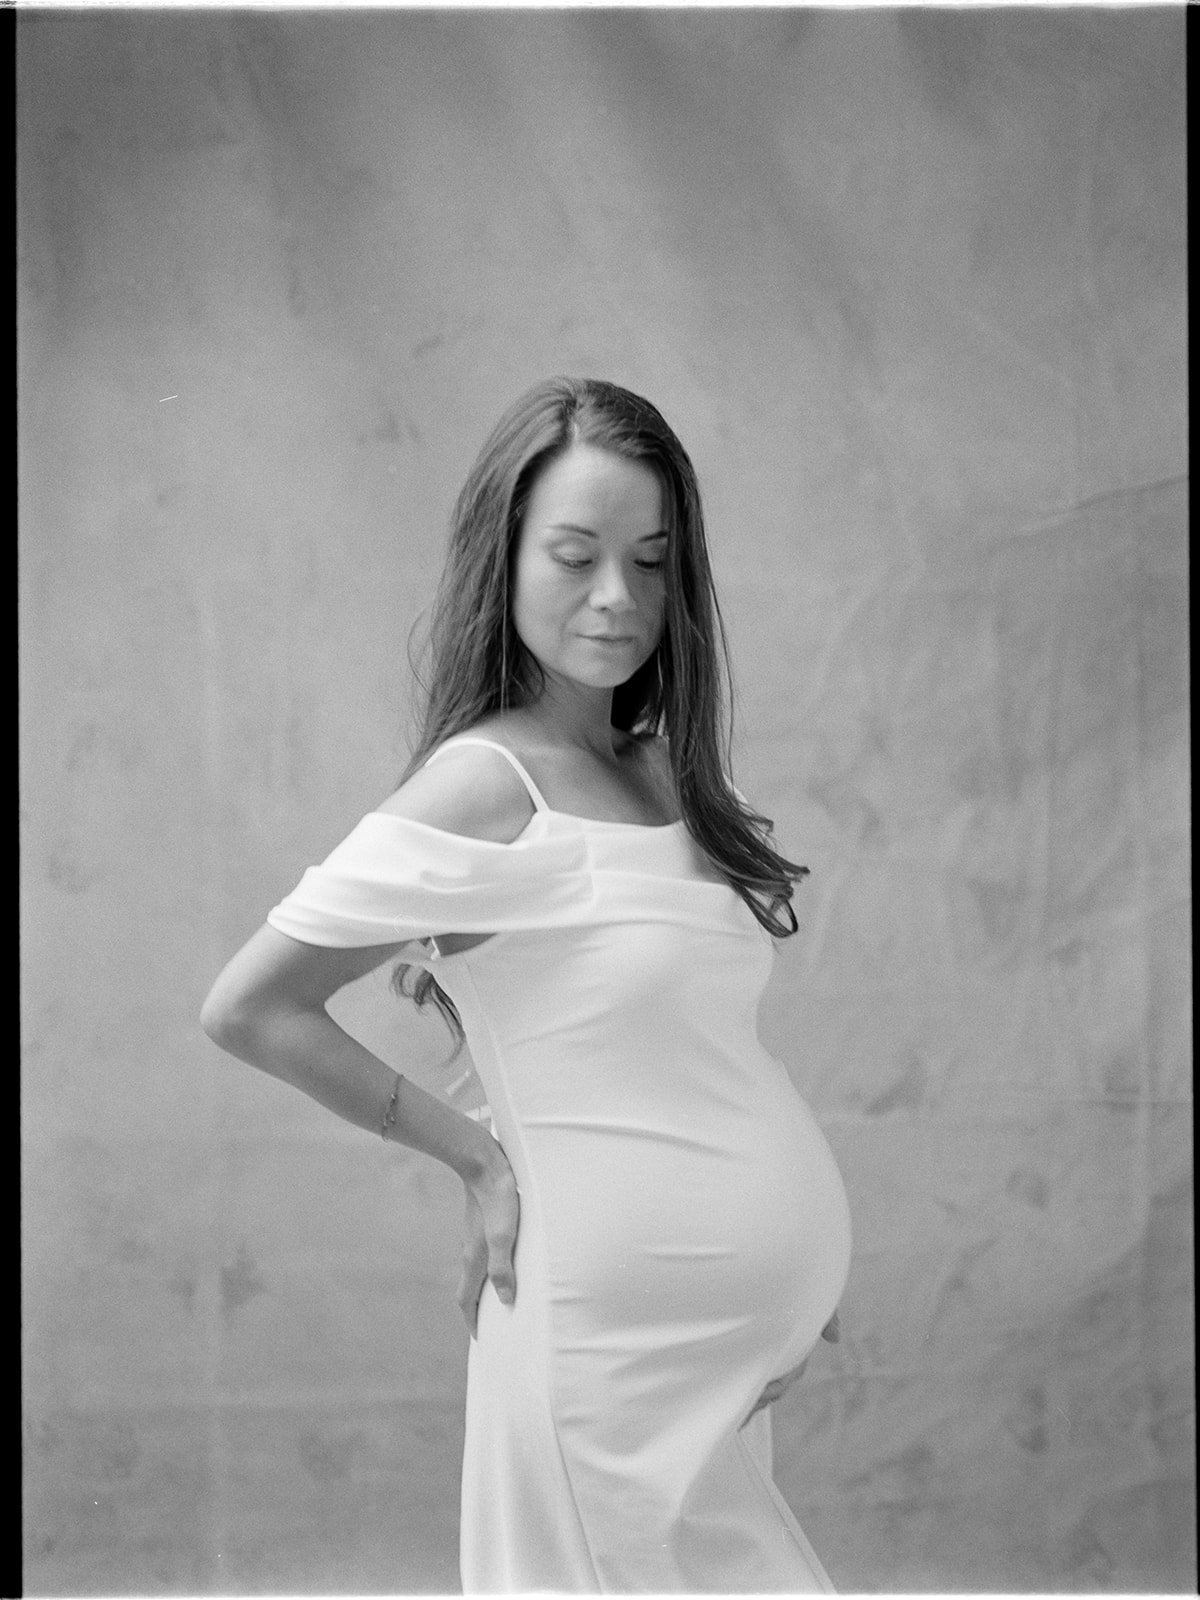 A pregnant woman in a white dress, captured in a black and white photo.